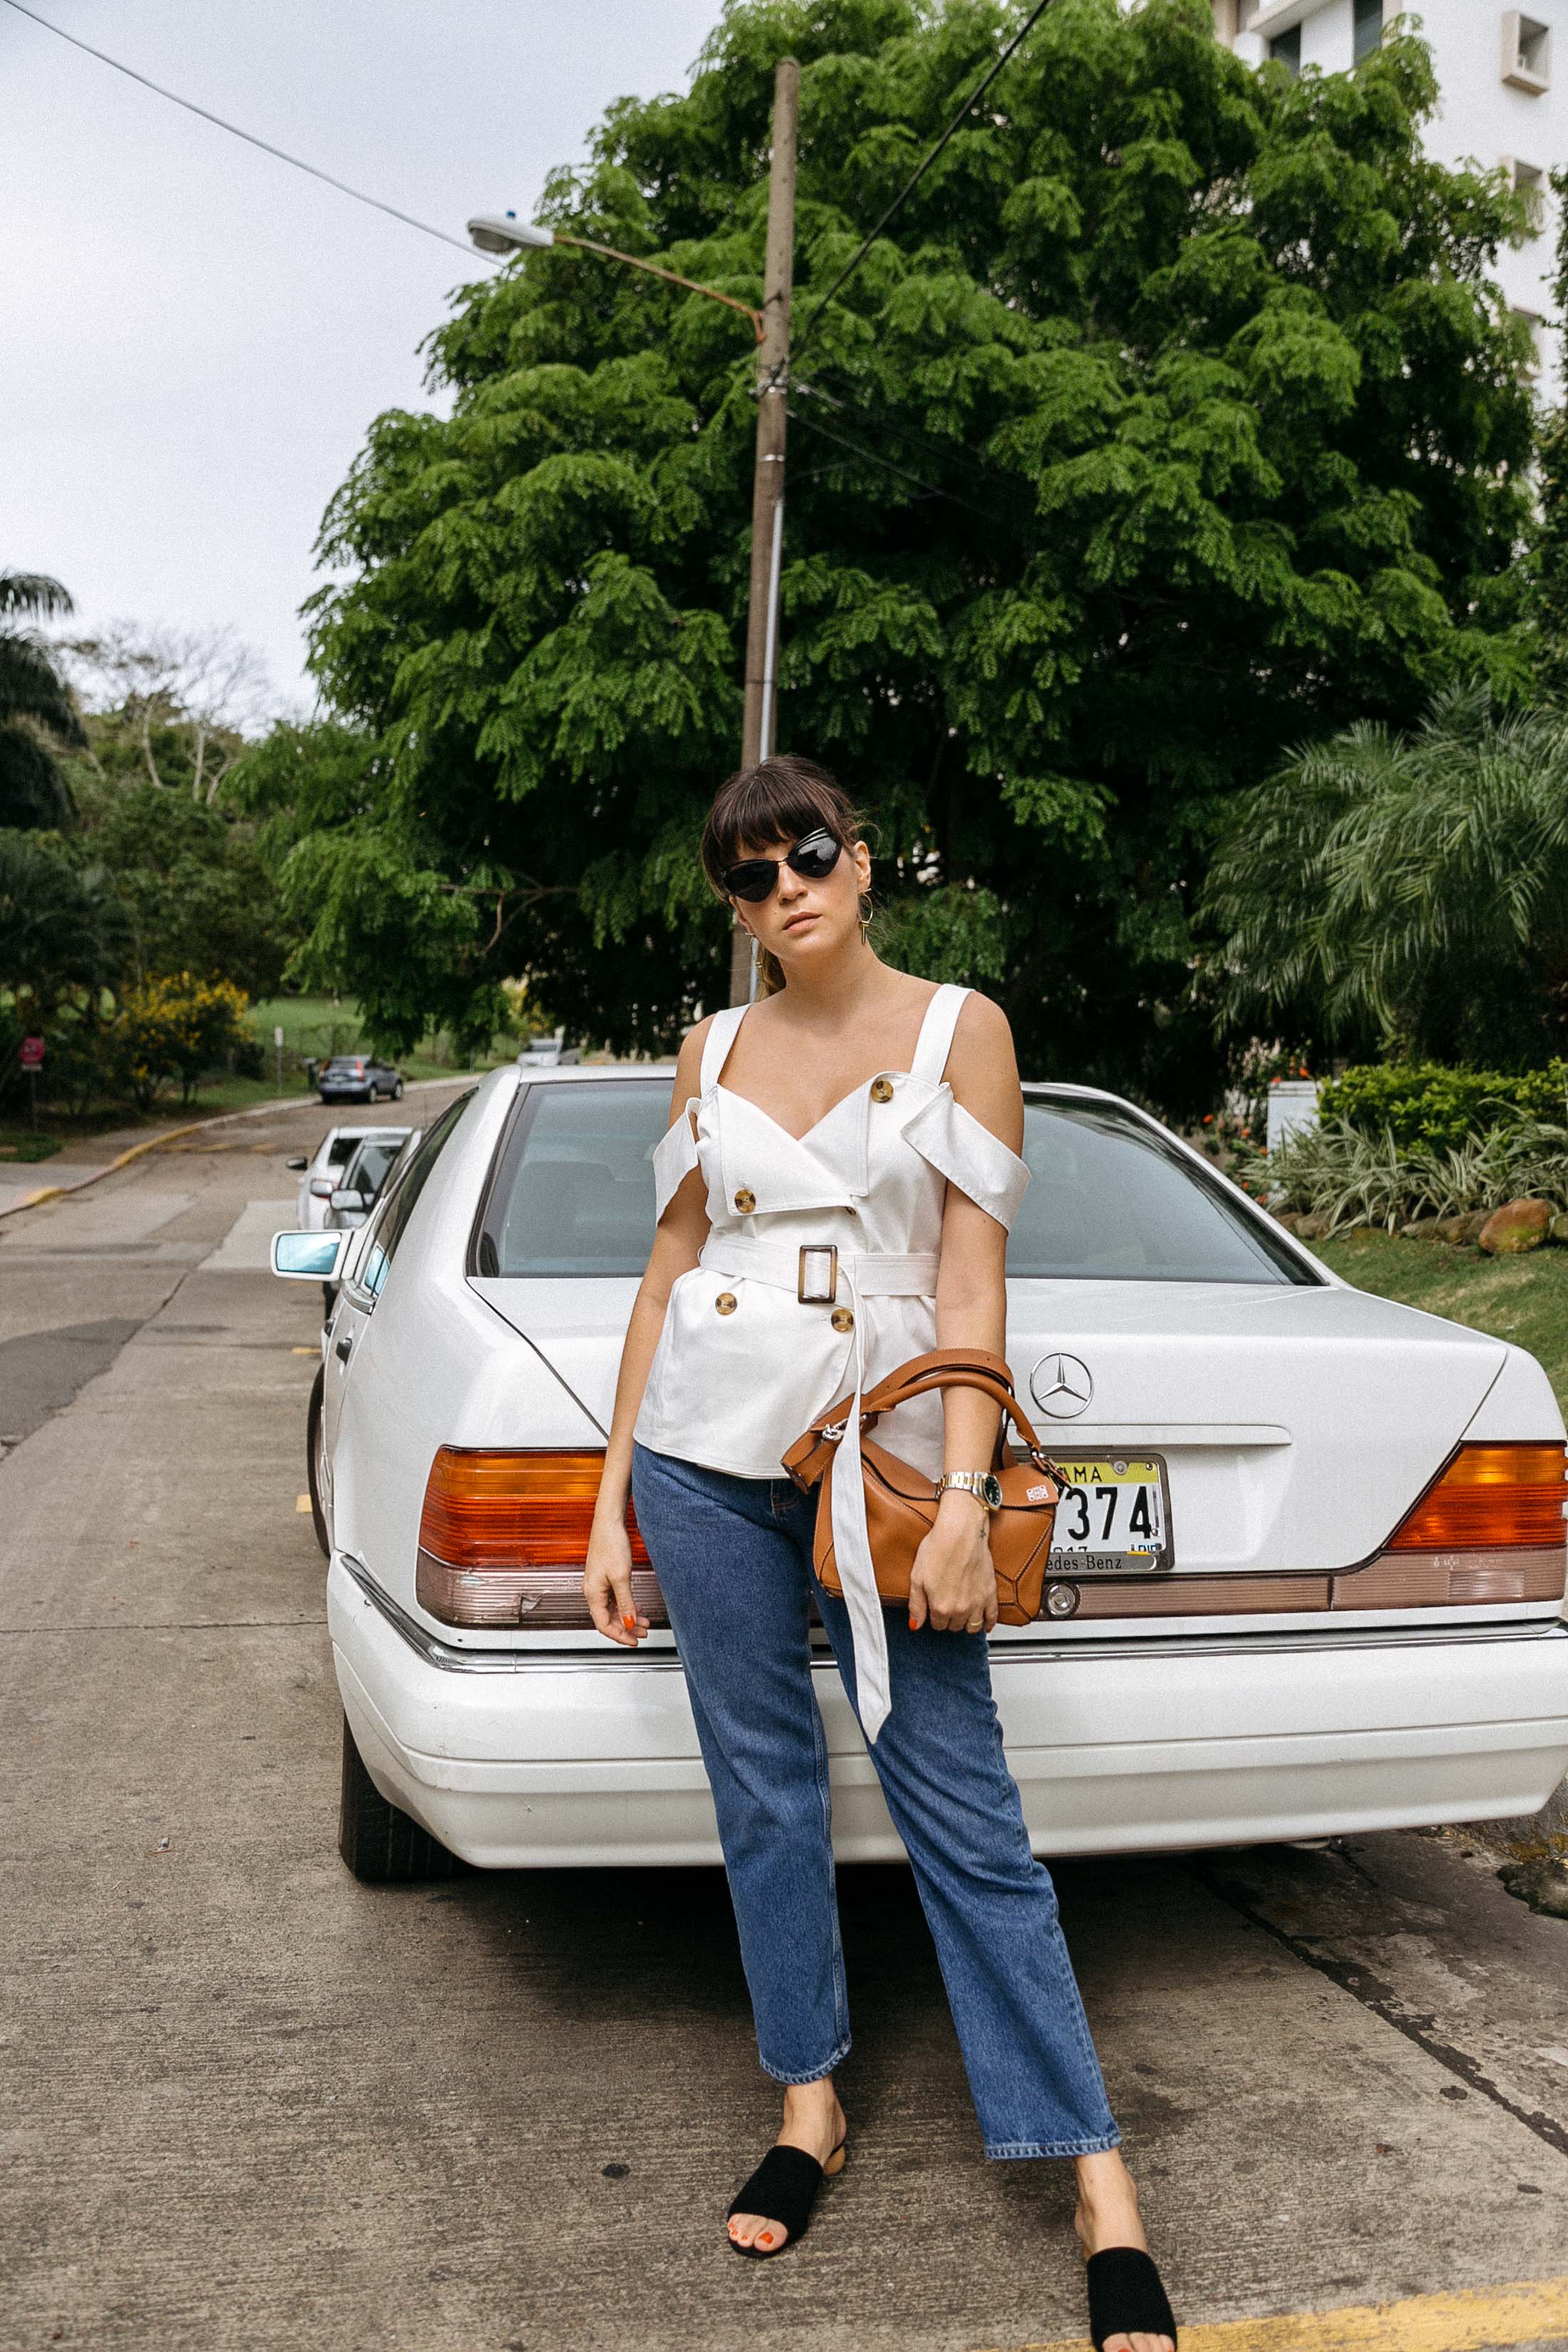 Maristella puts her own twist on this classic denim outfit combination